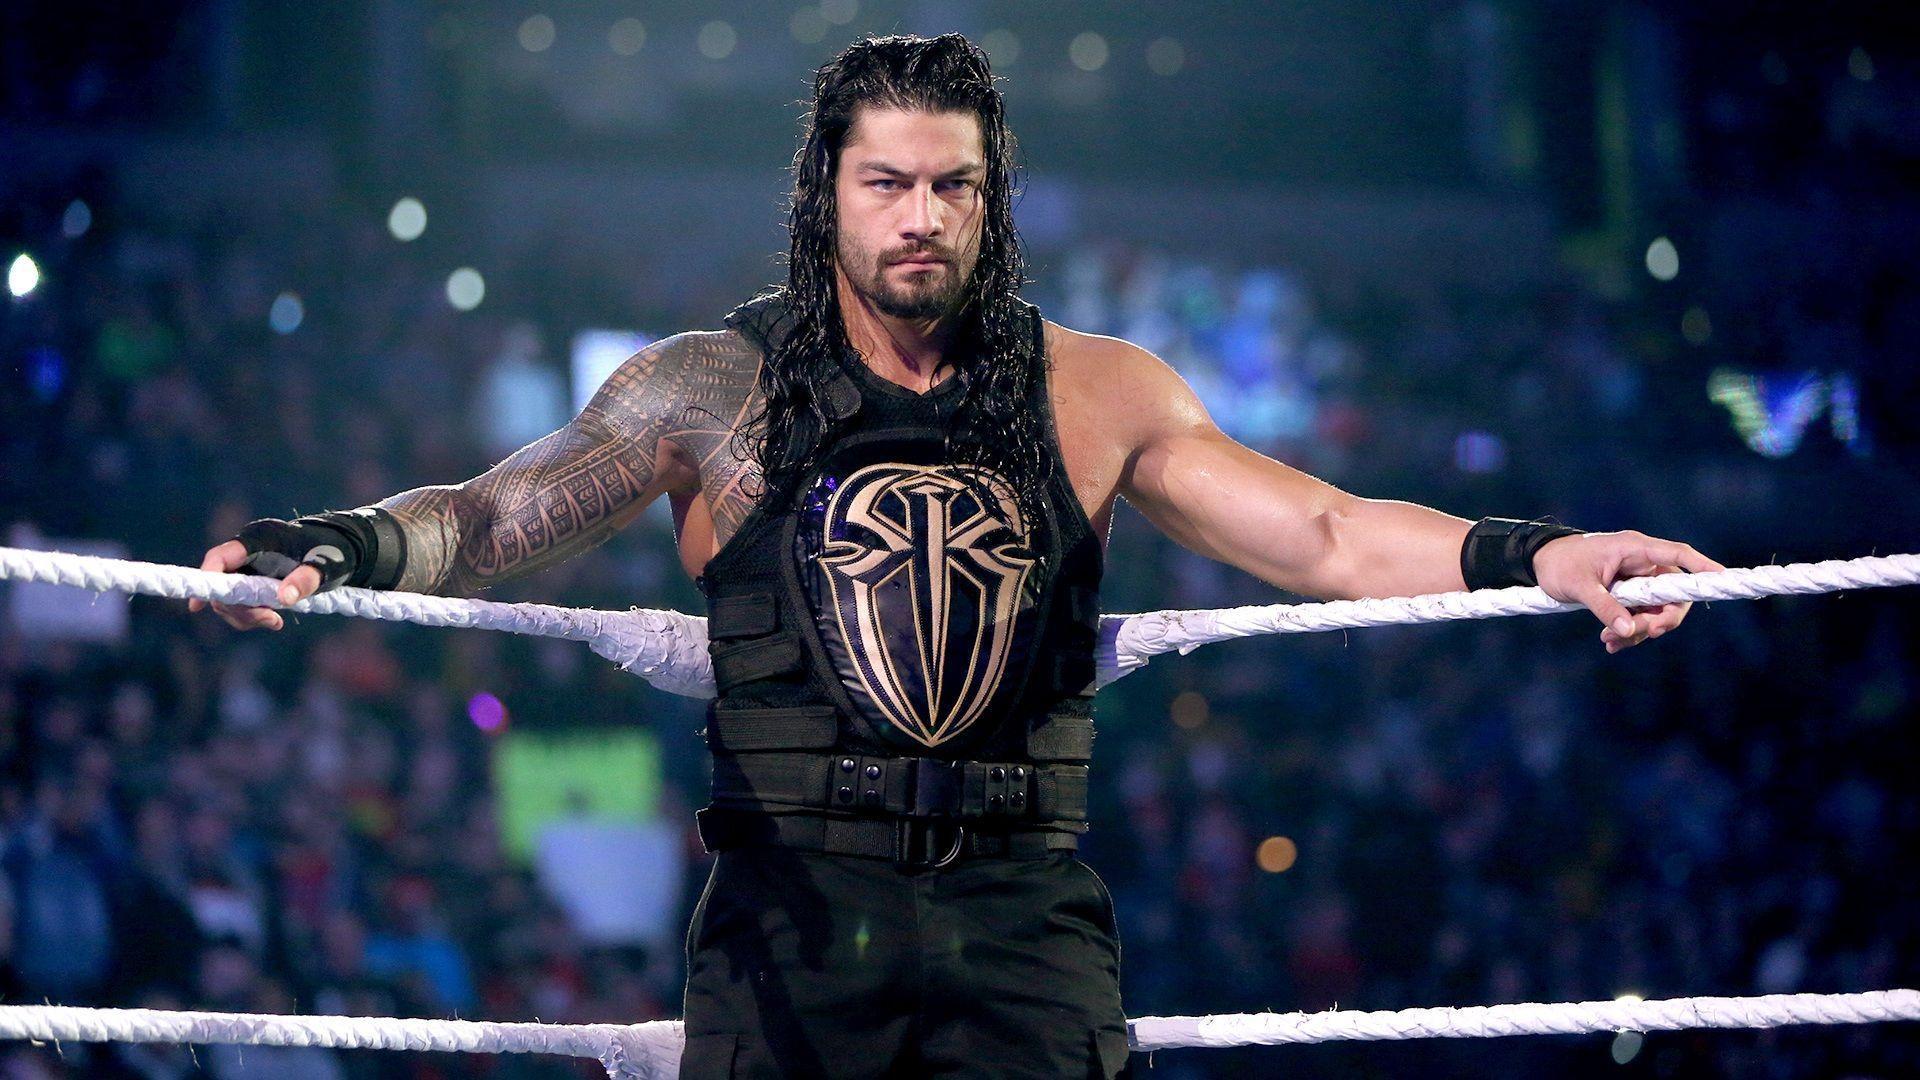 Background Roman Reigns Wallpaper Discover more American Player  Professional Roman Reigns Wrestler wallp  Roman reigns Roman reigns  logo Roman reigns tattoo